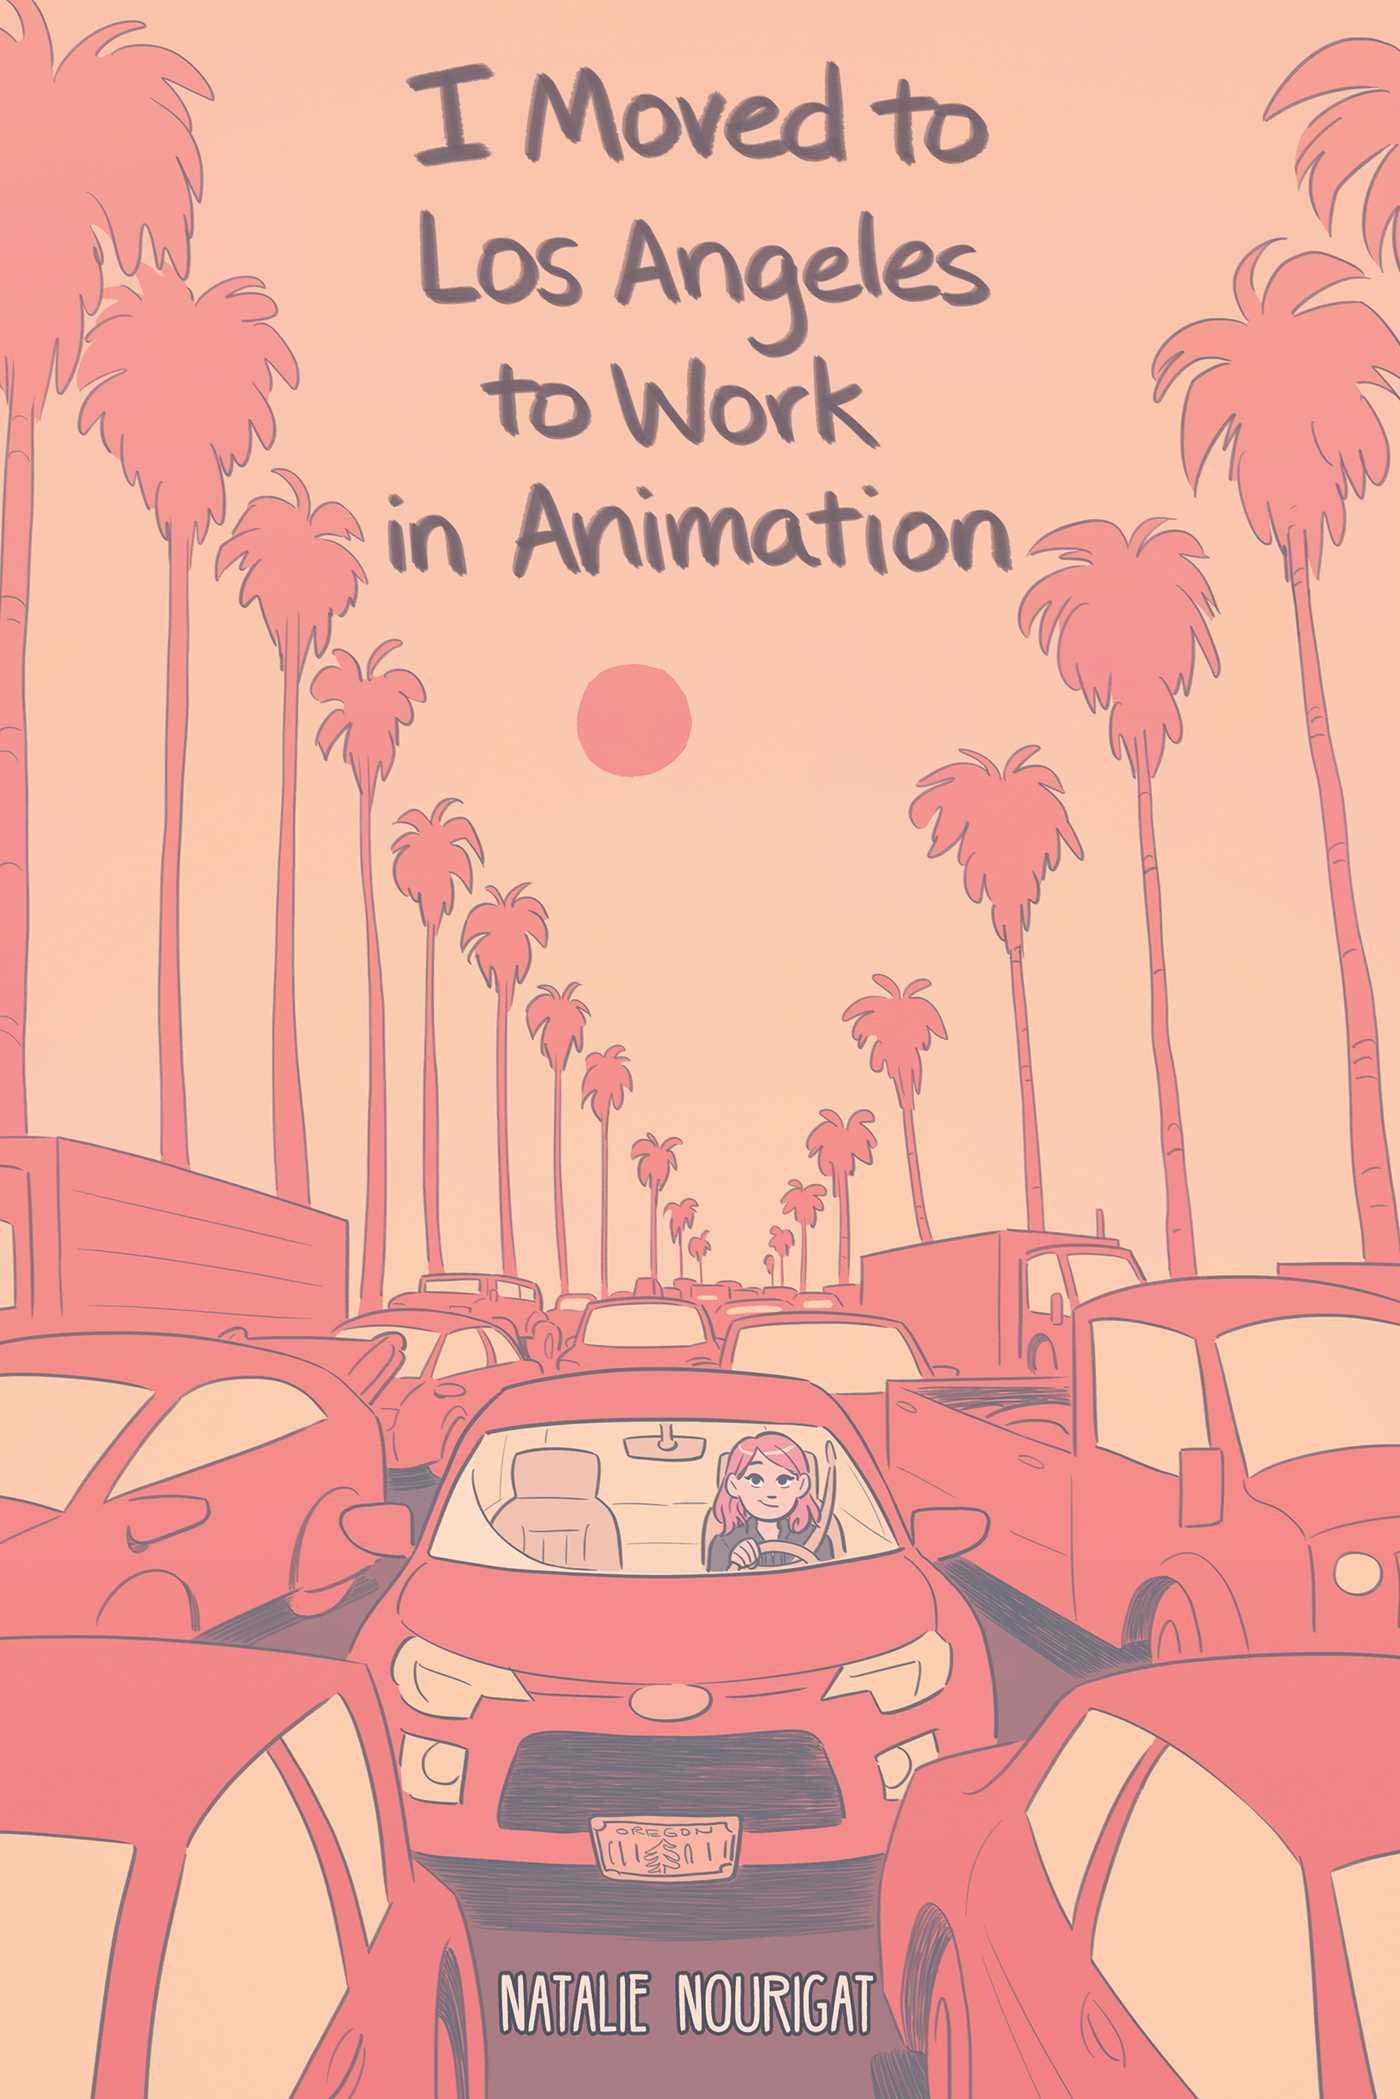 I Moved to Los Angeles to Work in Animation, Natalie Nourigat